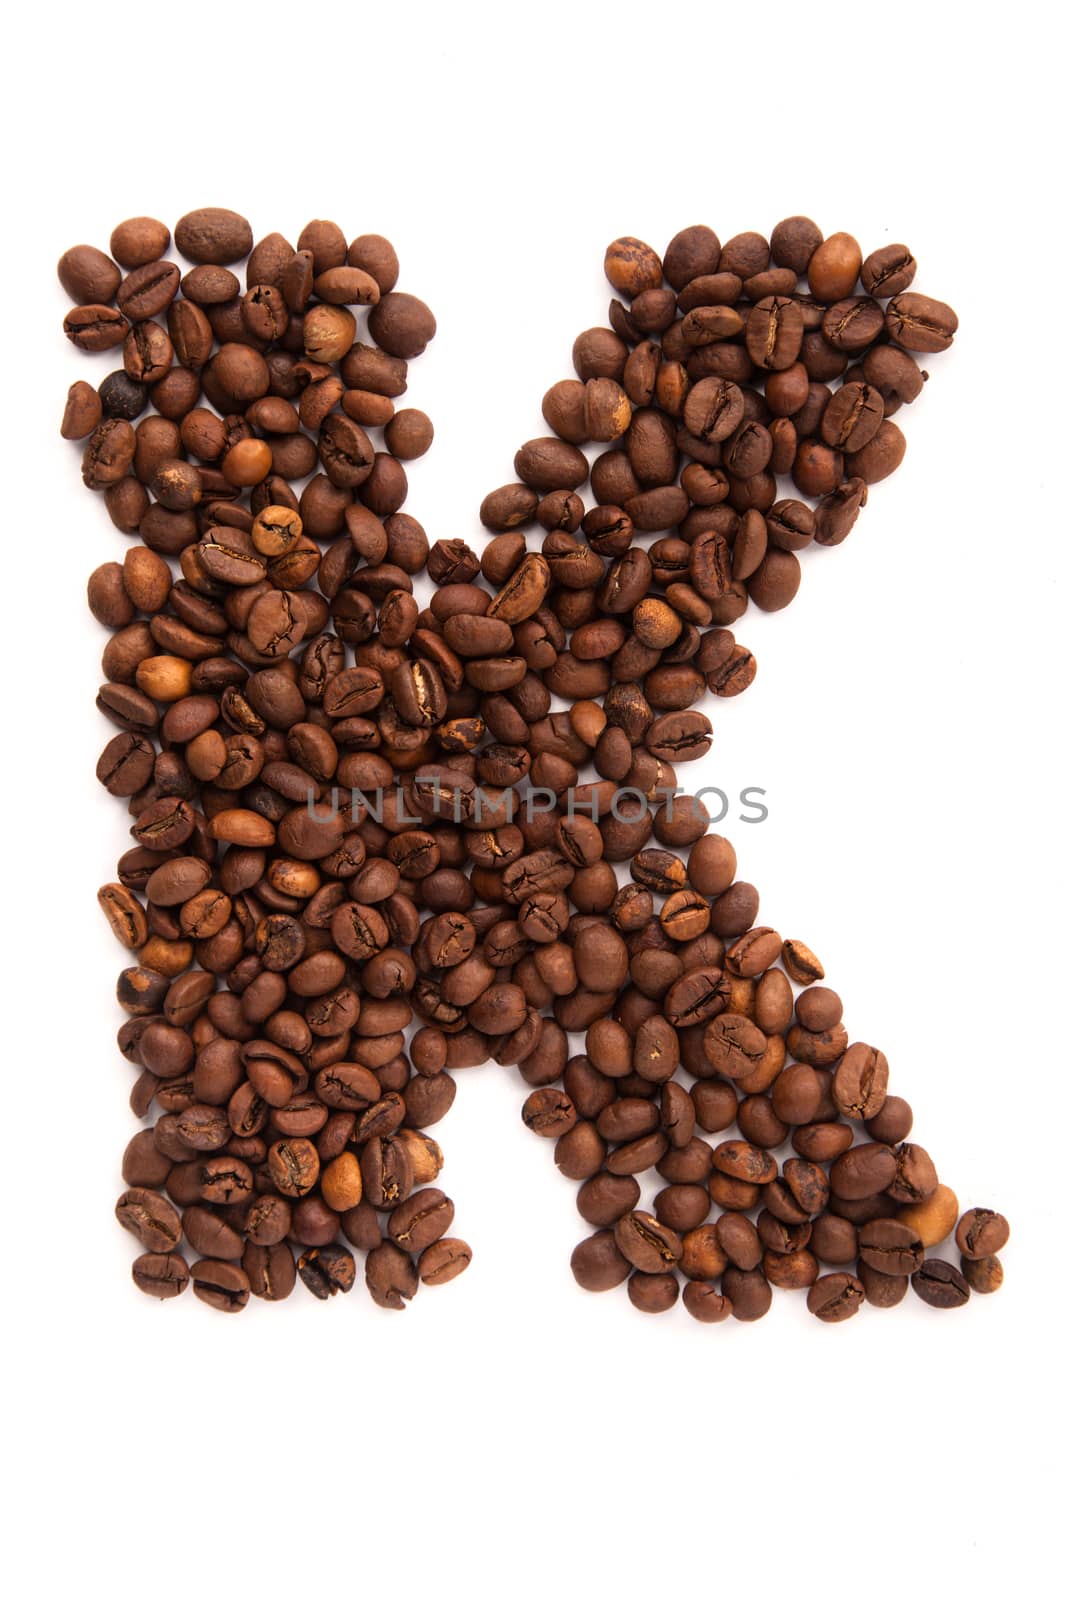 Alphabet letter I of roasted coffee beans isolated on white background by traza